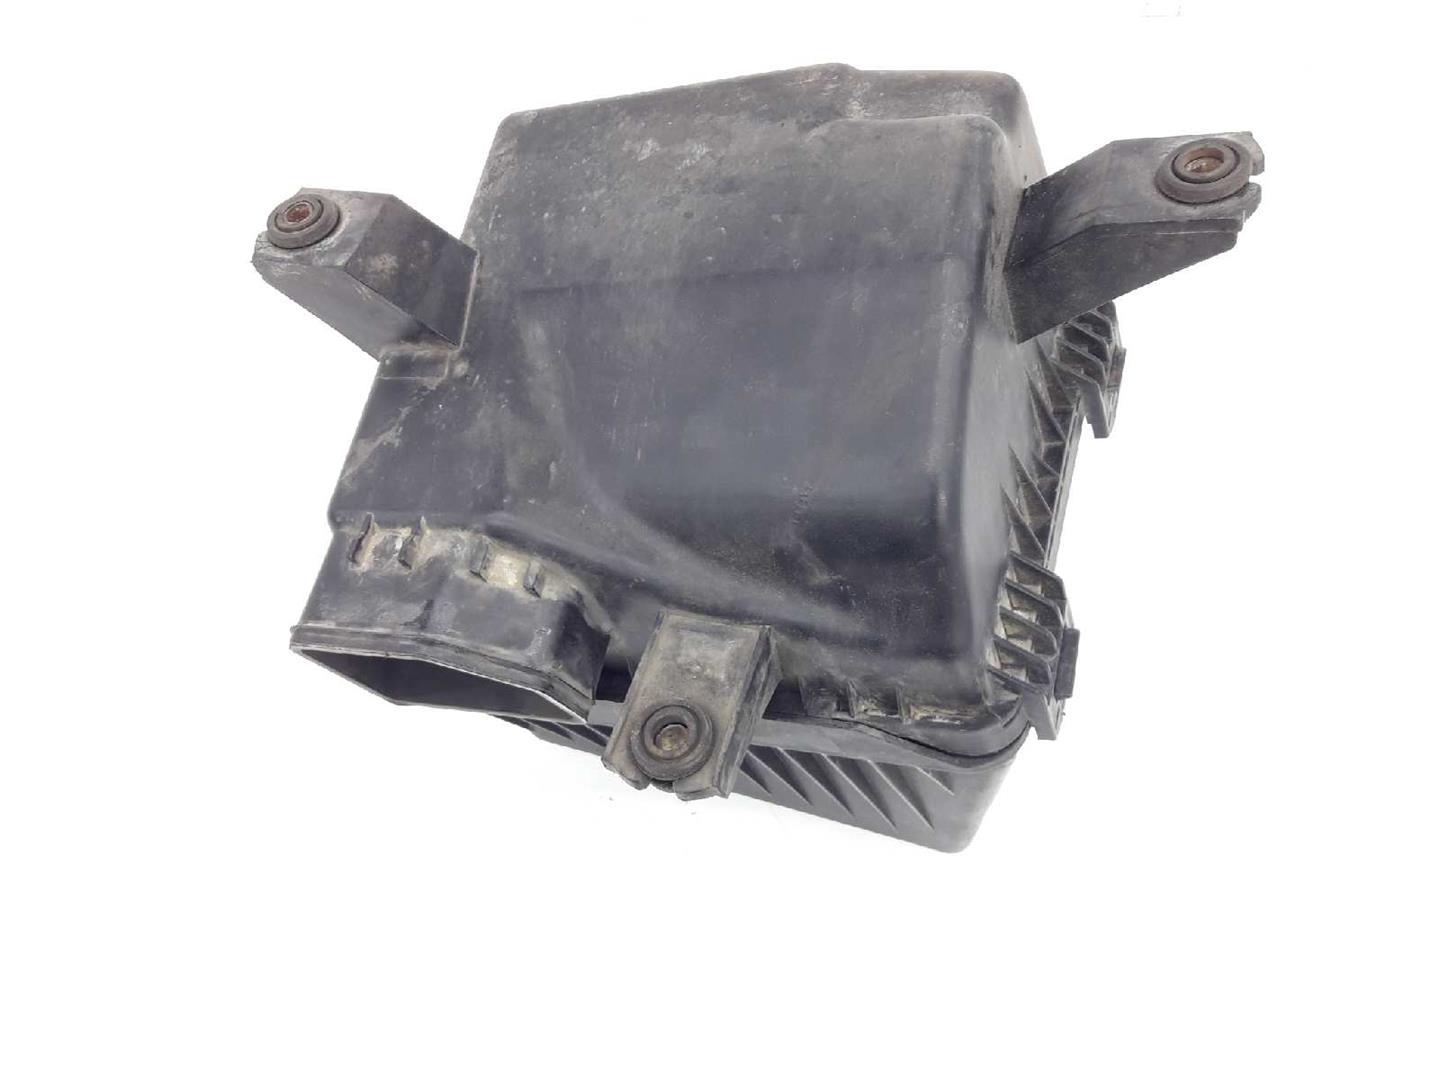 HYUNDAI Terracan 2 generation (2004-2009) Other Engine Compartment Parts 28112H1915, 28111H1930 19706856